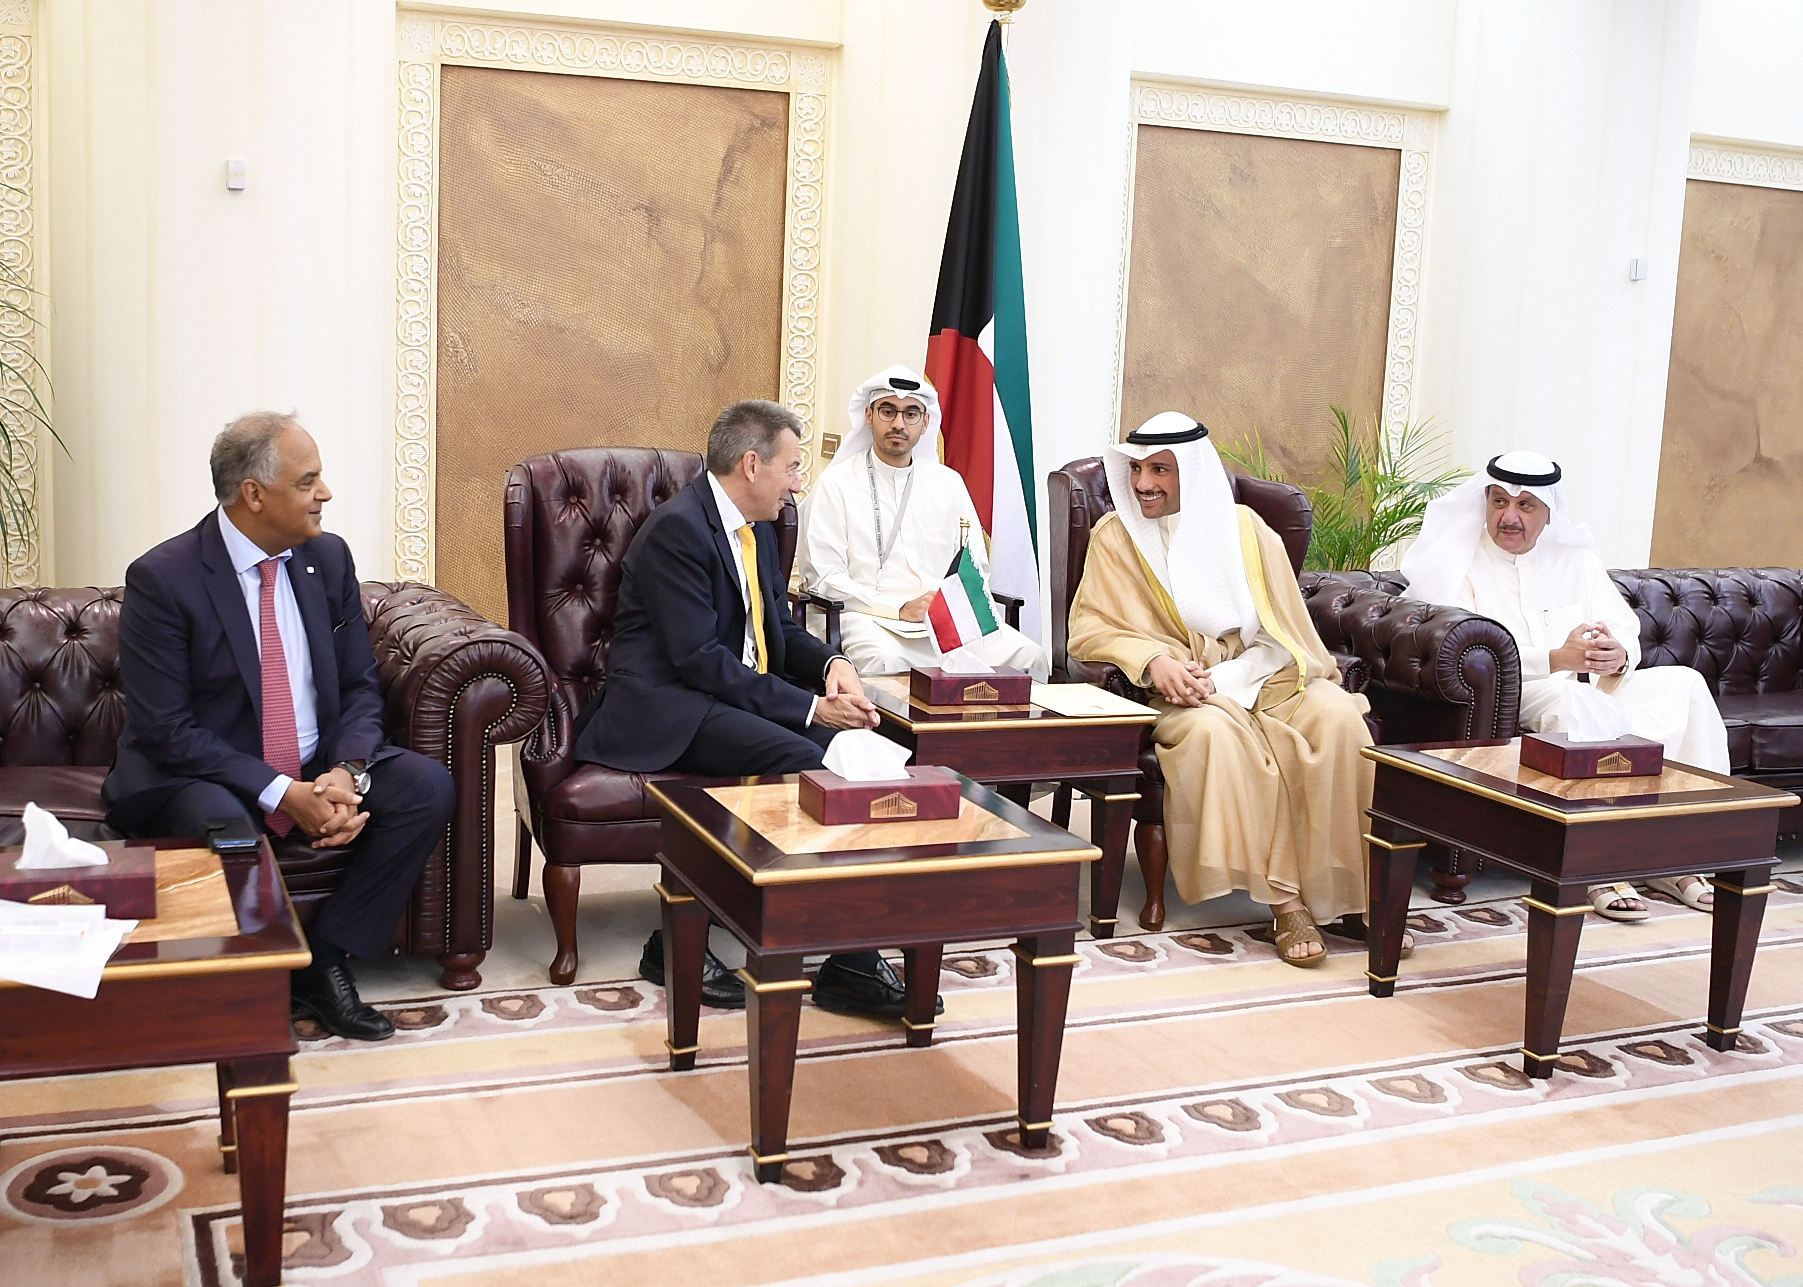 National Assembly Speaker Marzouq Ali Al-Ghanim receiveS President of the (ICRC) Peter Maurer